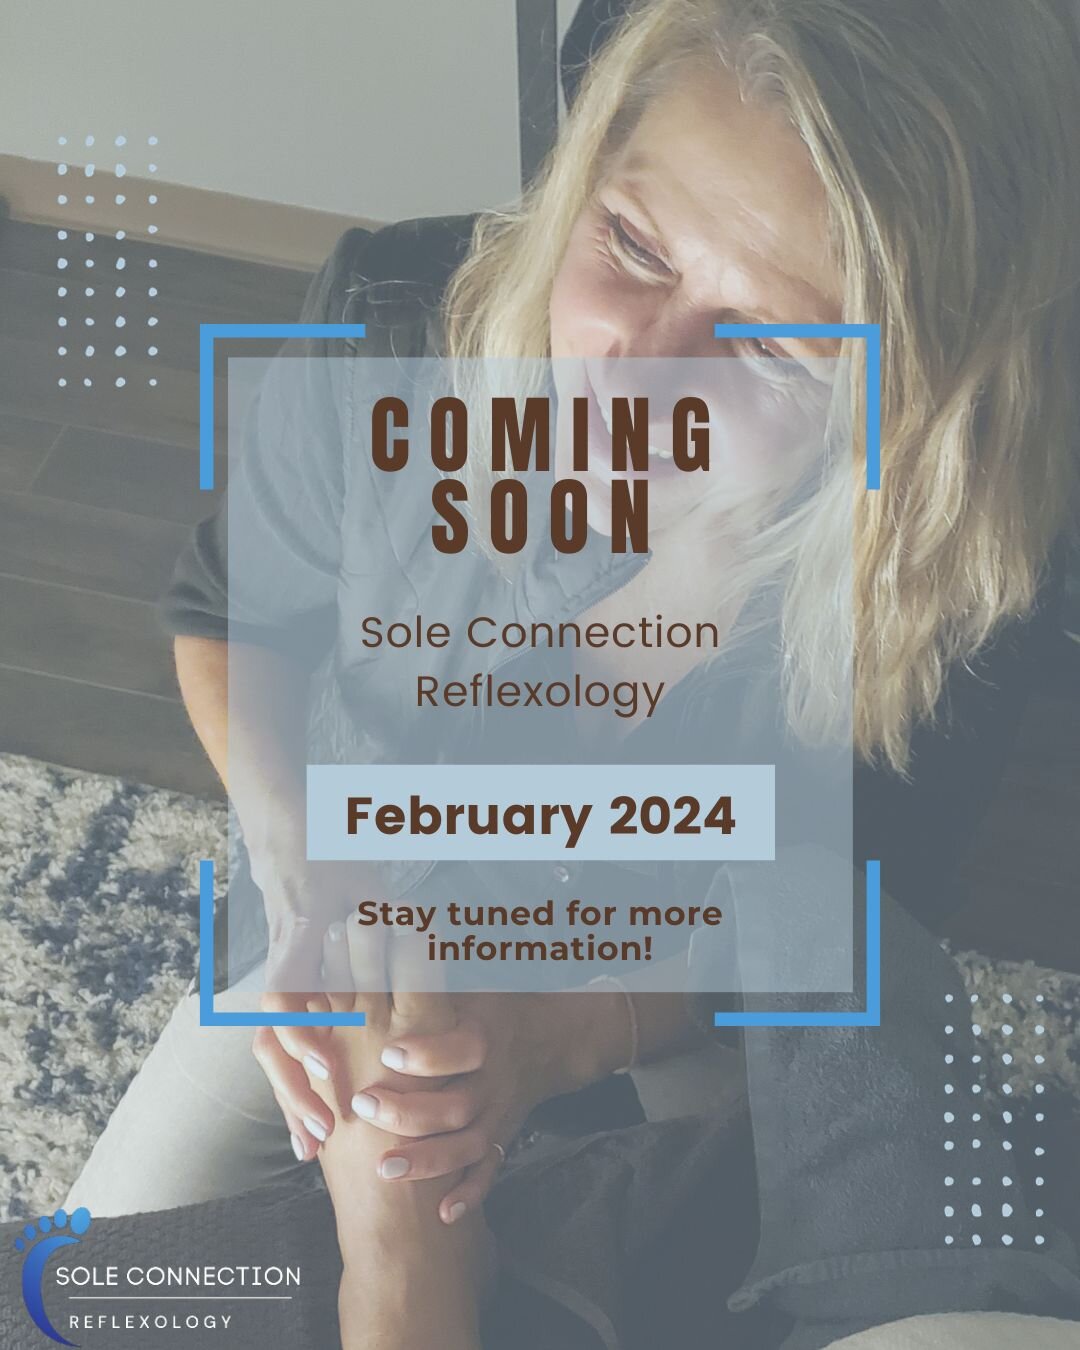 Another BIG announcement!!!

SOLE CONNECTION REFLEXOLOGY, COMING FEBRUARY 2024!!

We are so excited to have Jill Kobza of Sole Connection Reflexology joining our space and offering reflexolgy services to Panora and surrounding communities. 

Stay tun